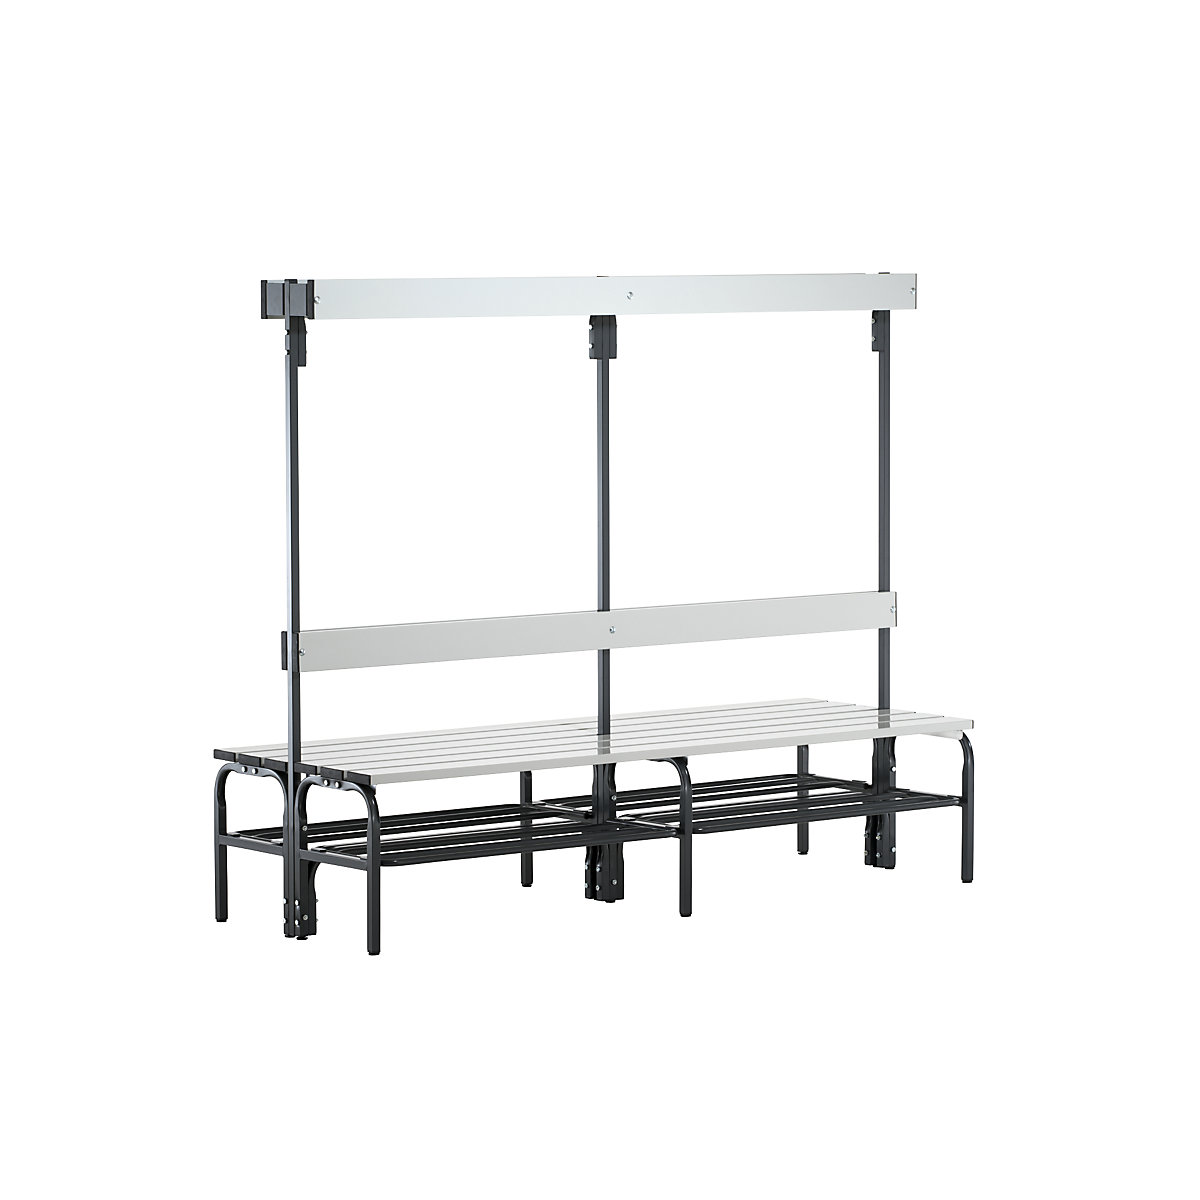 Sypro – Changing room bench made of stainless steel, HxD 1650 x 725 mm, length 1500 mm, 12 hooks, charcoal, shoe rack